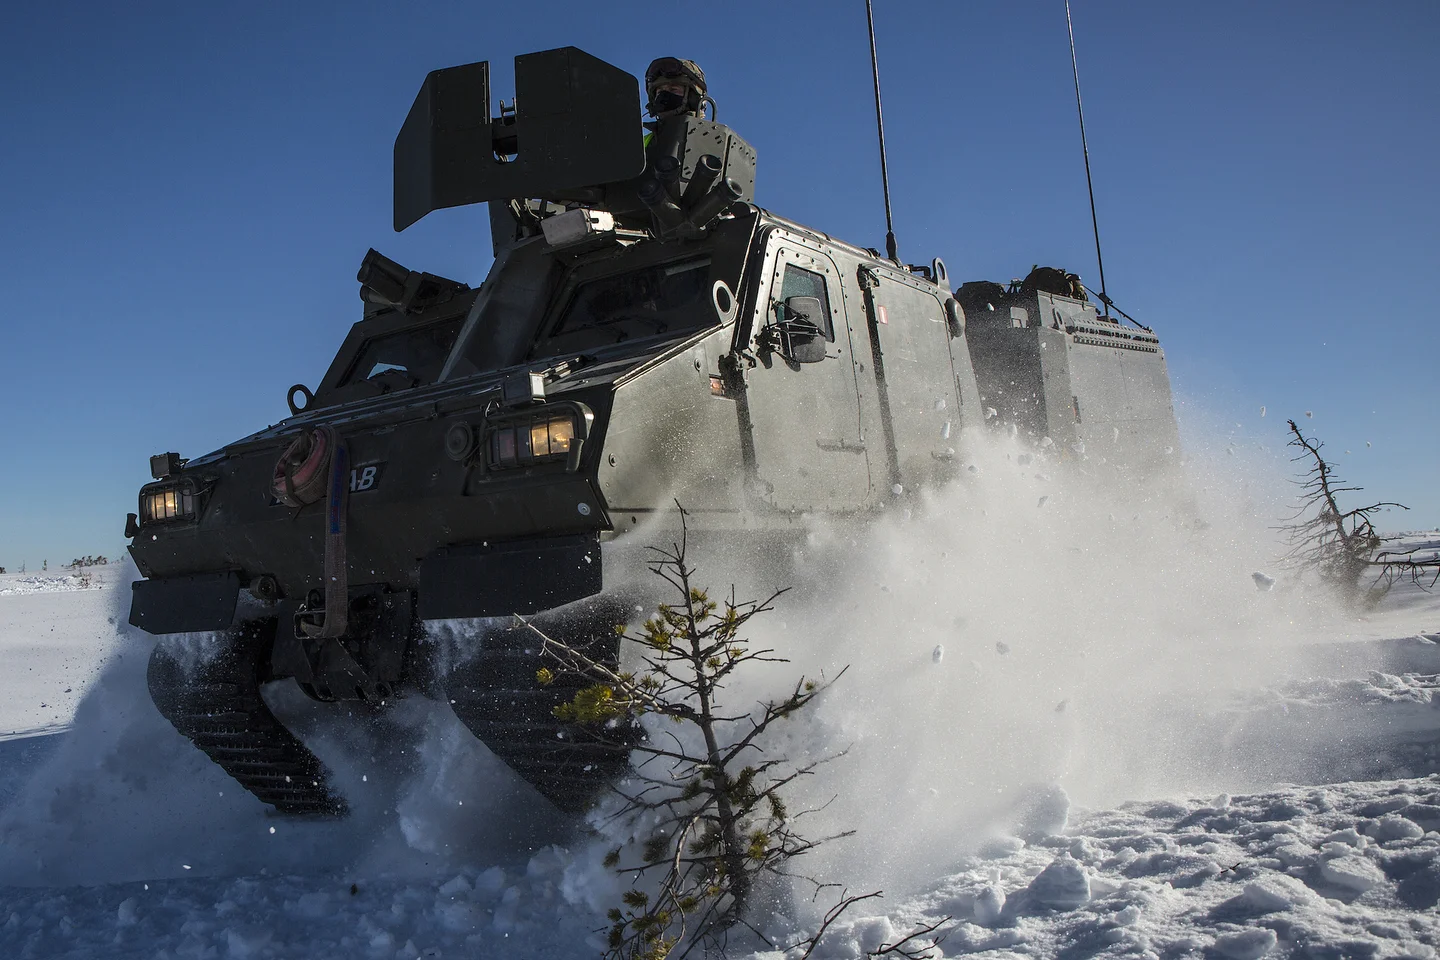 U.S. Army Announces New Cold Weather All-Terrain Vehicle for Arctic